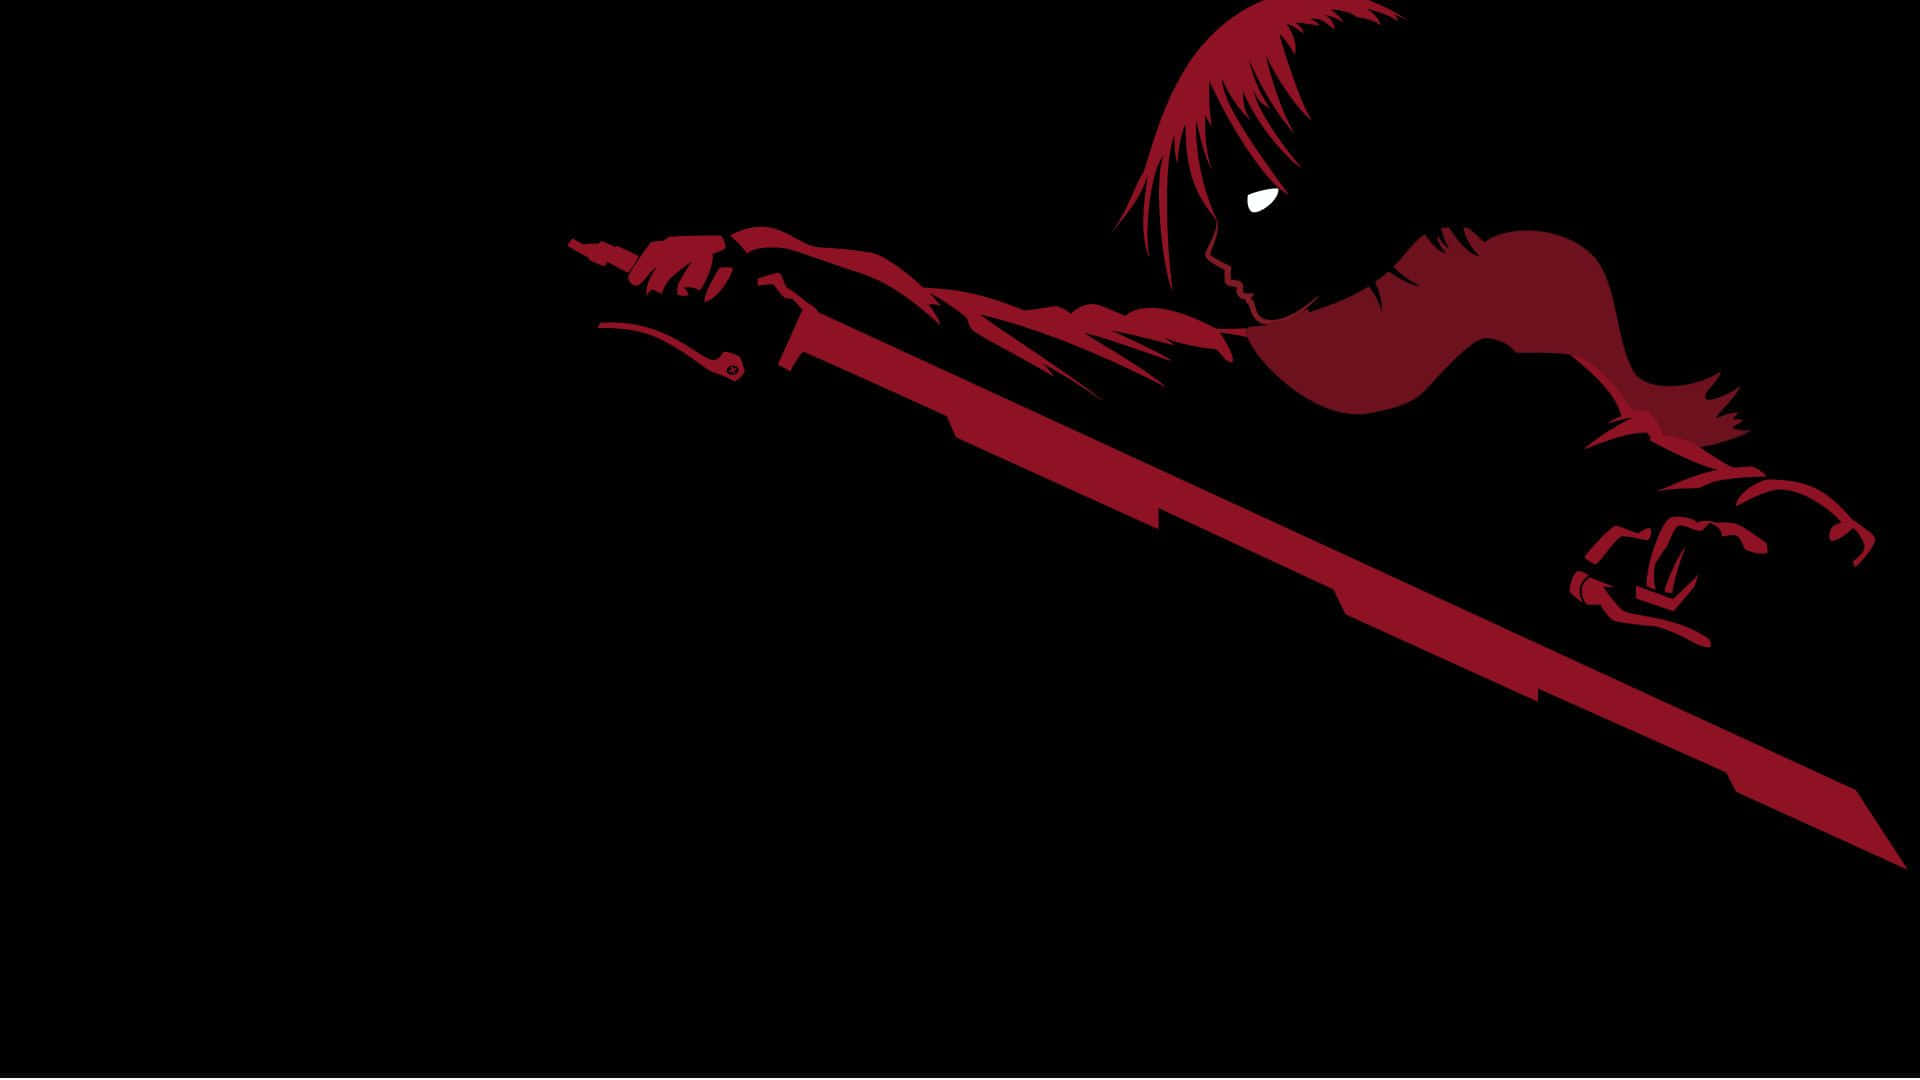 A bold and edgy black and red anime art Wallpaper